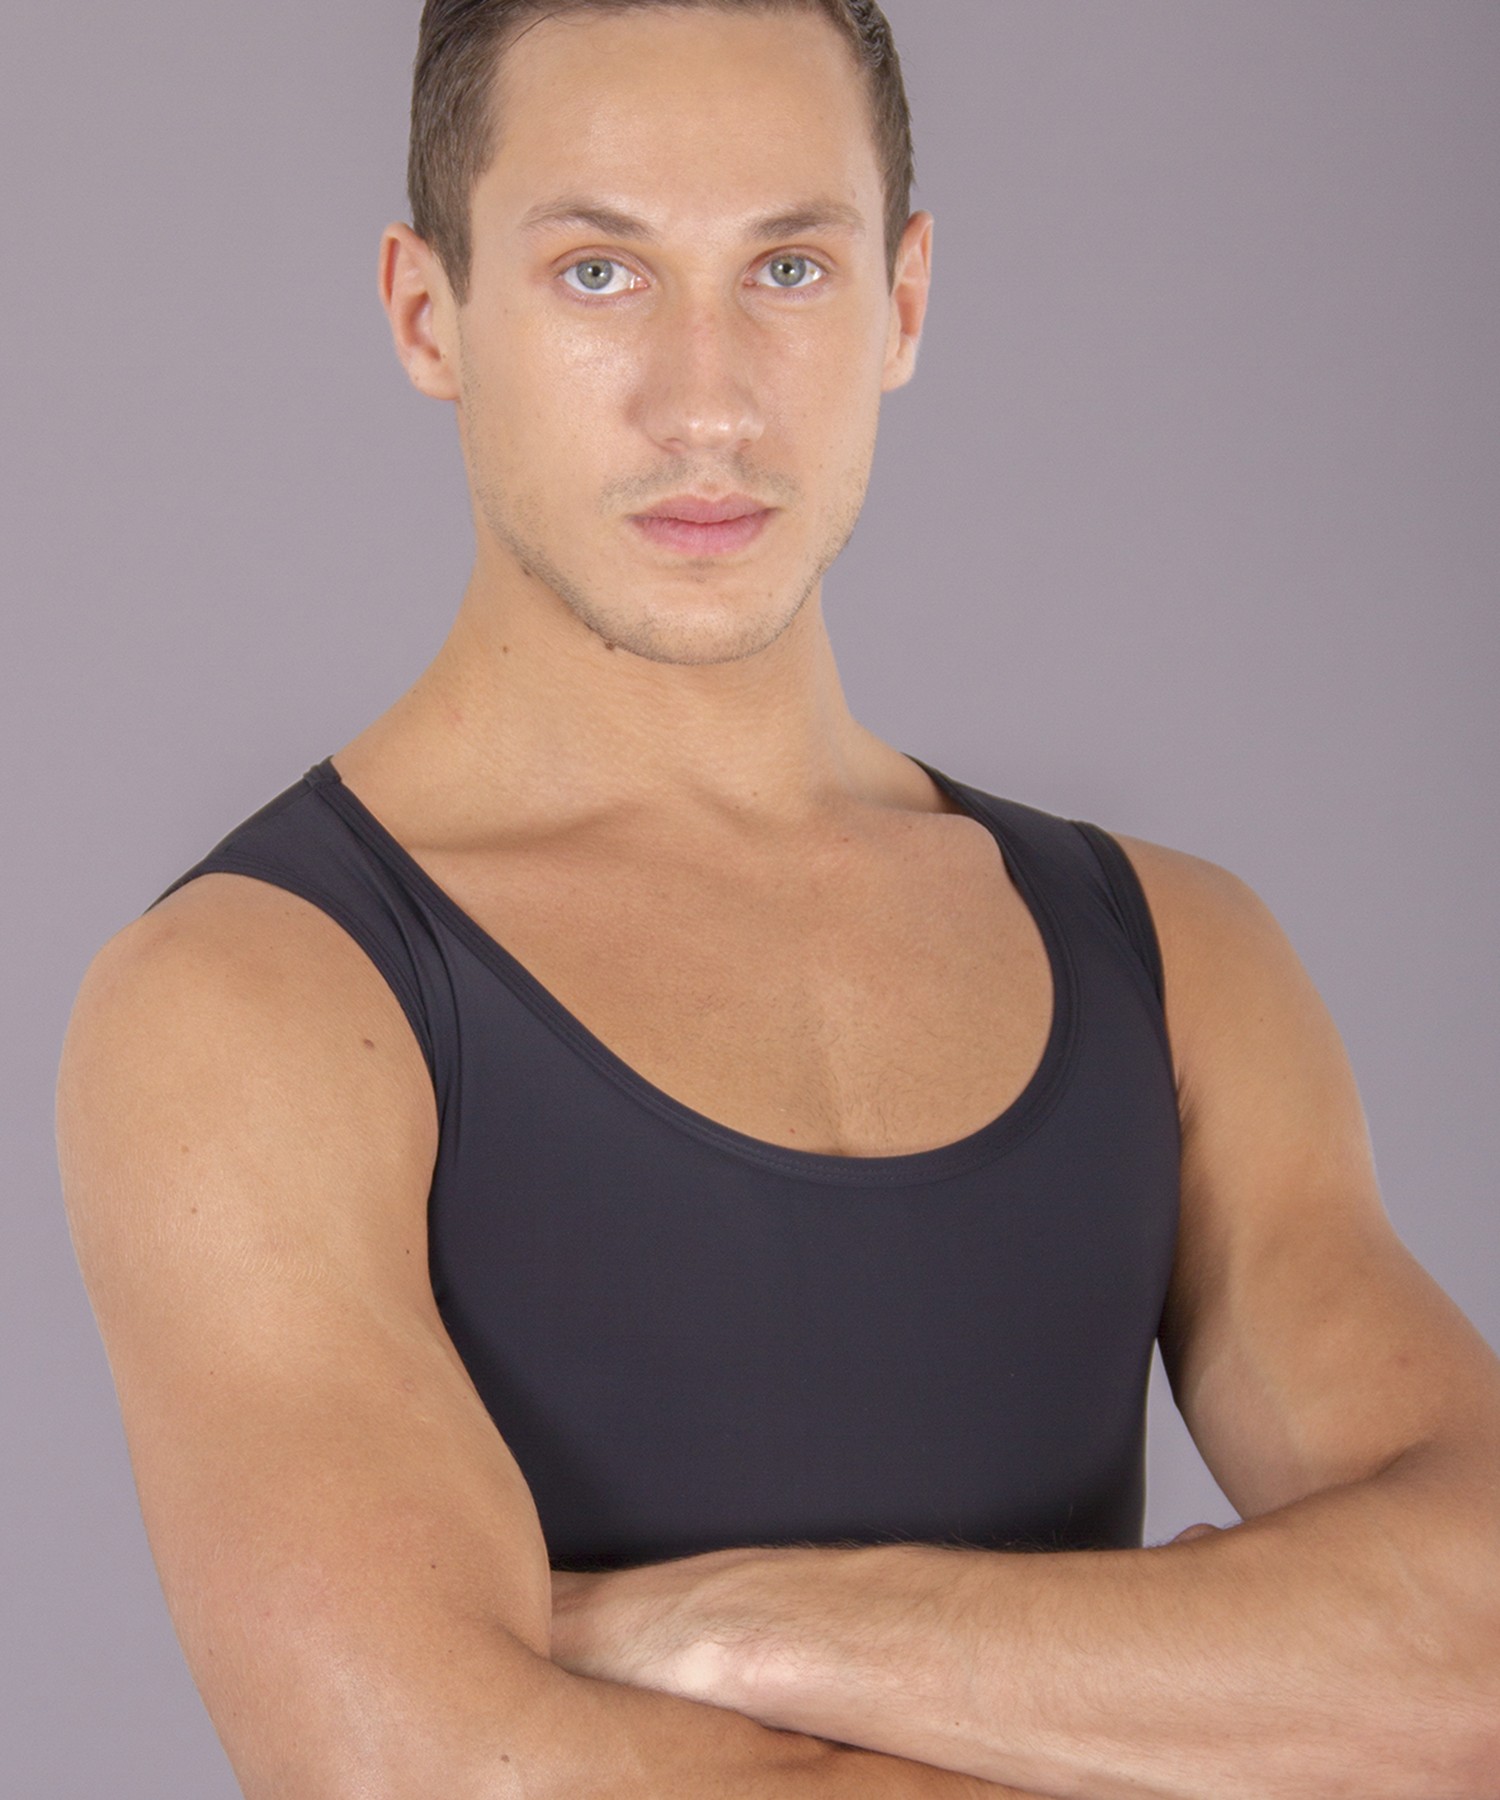 Men's Shirts, DSI London, 4058 Black Venus Vest, $90.00, from VEdance LLC,  The very best in ballroom and Latin dance shoes and dancewear.